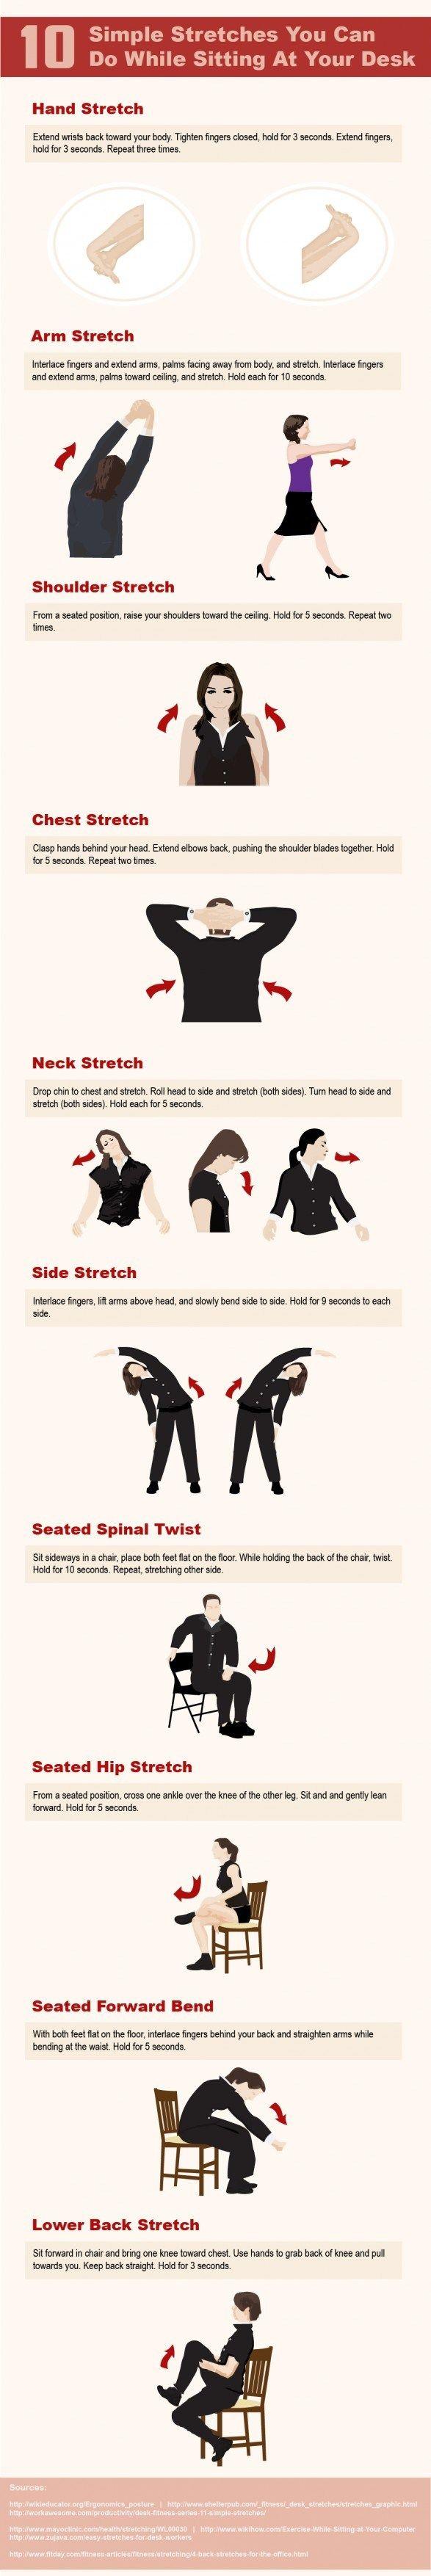 Wedding - 10 Simple Stretches To Do At Your Desk Infographic